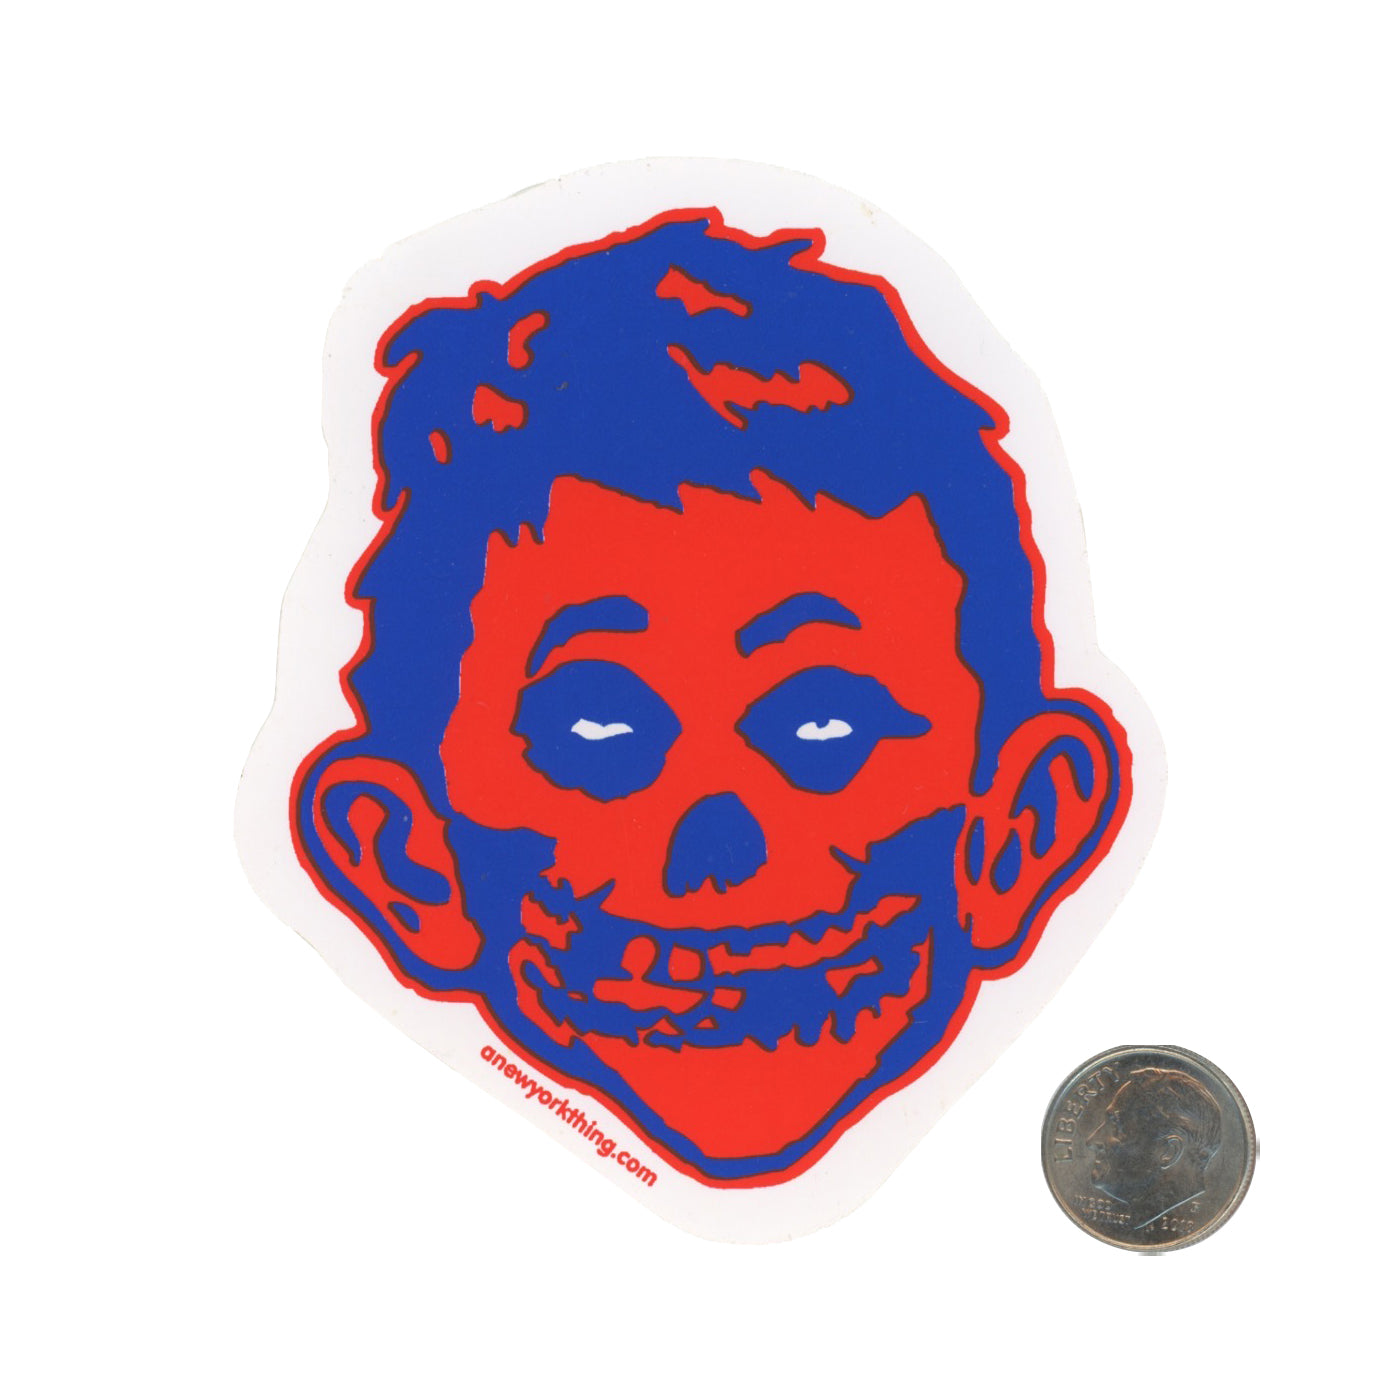 A NY Thing Alfred E. Newman Skull Sticker with dime